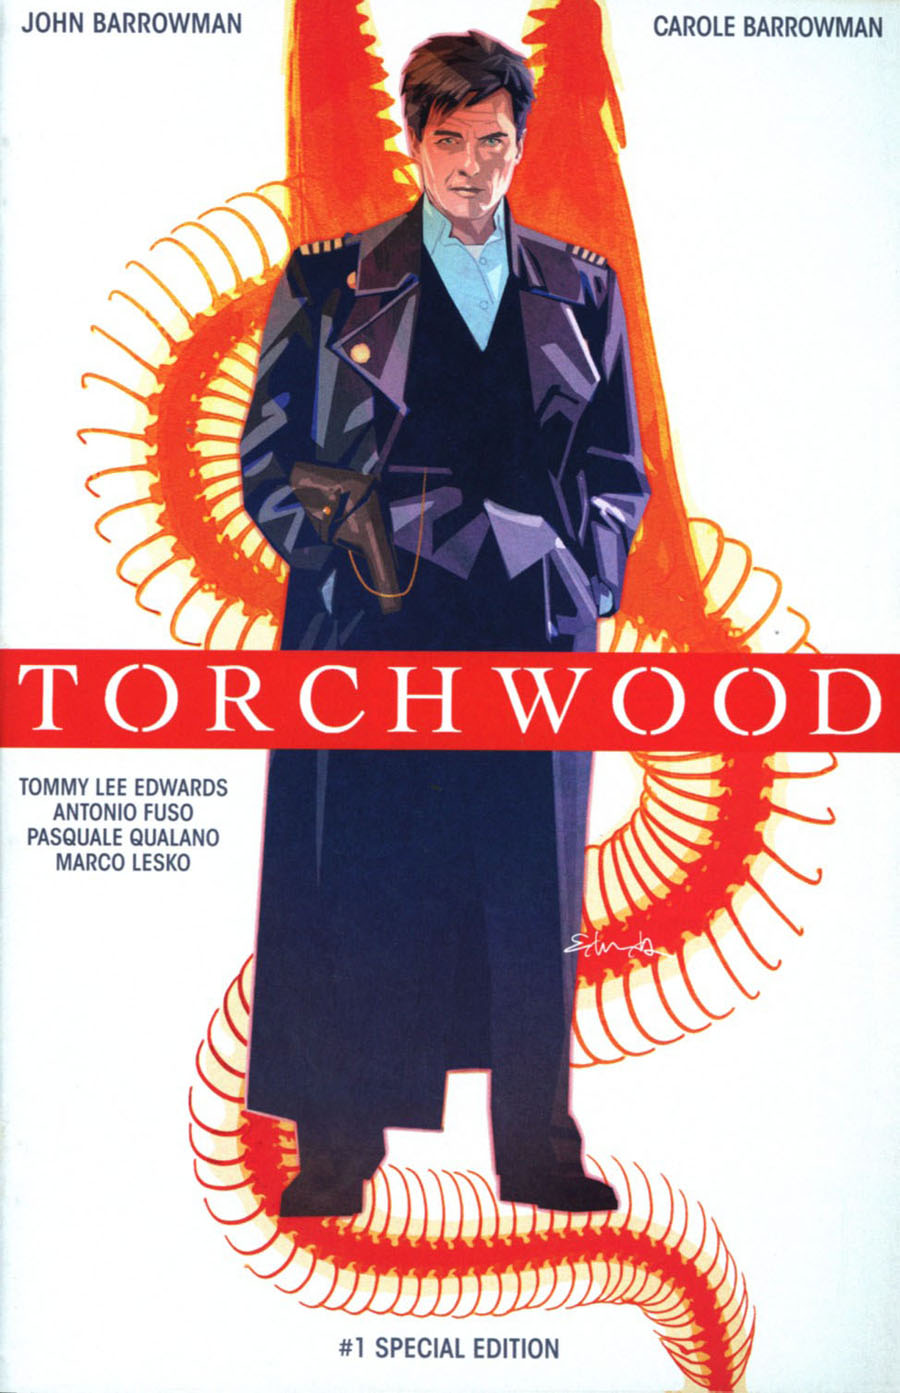 Torchwood Vol 2 #1 Cover G Convention Special